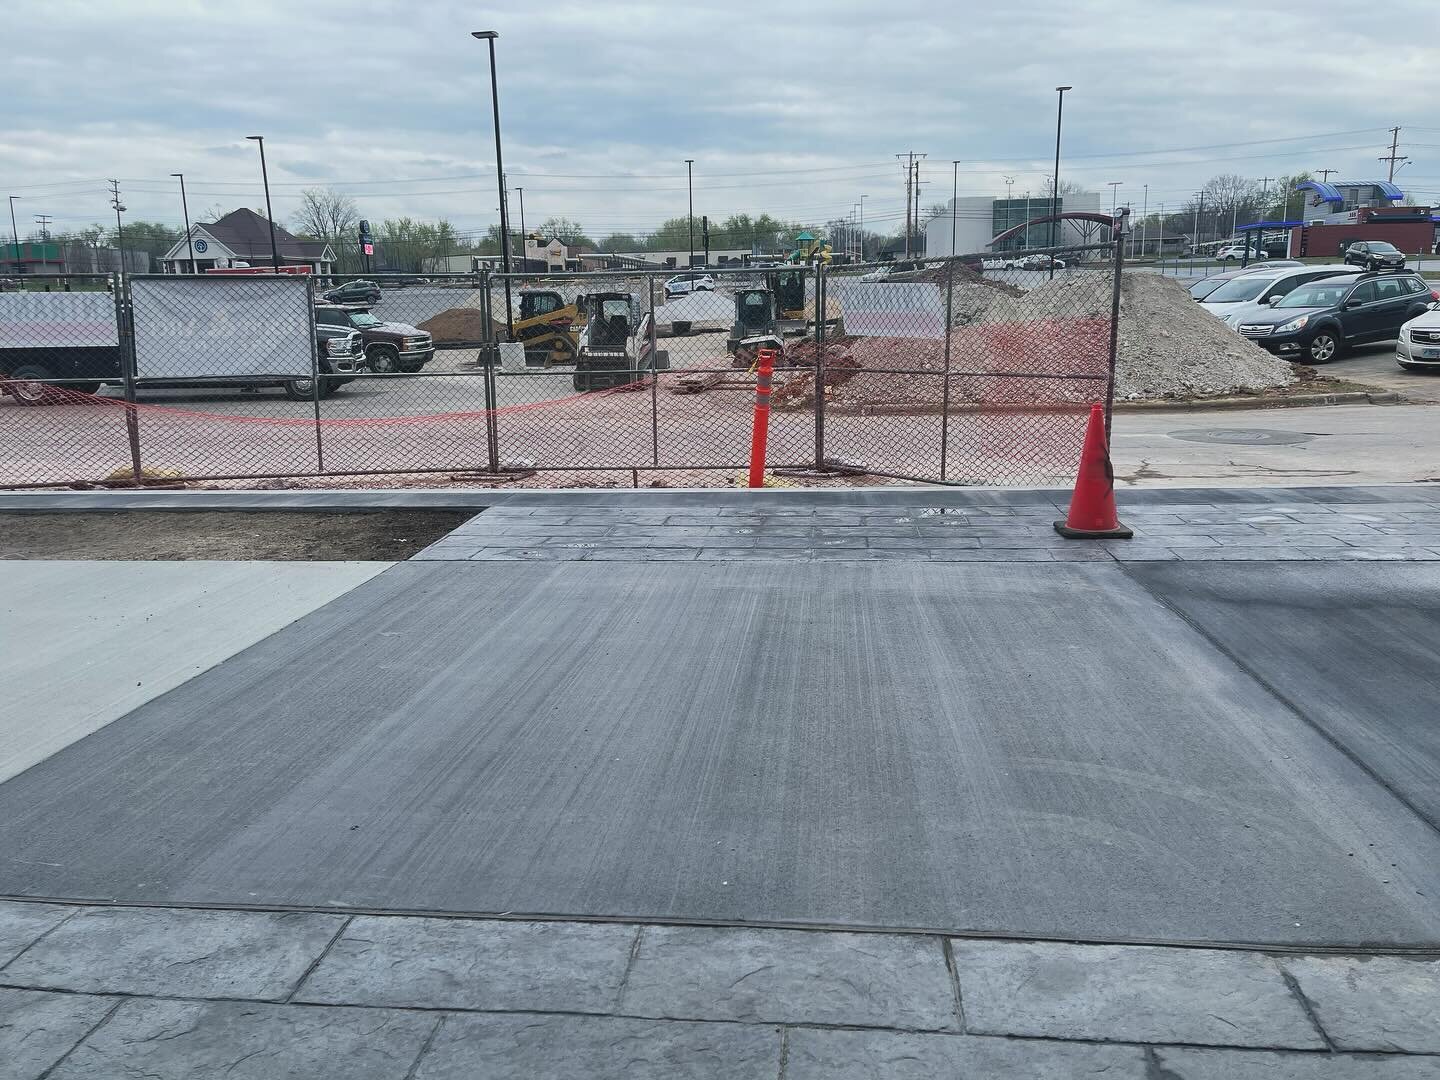 One step forward. 10 parking spaces back. Week 38 of #constructionwatch continues.

We have a SECOND entrance that is now open along THE FENCE. 

But as you can see, somehow, we have more obstacles than ever to park your vehicle. 

And yes. There USE